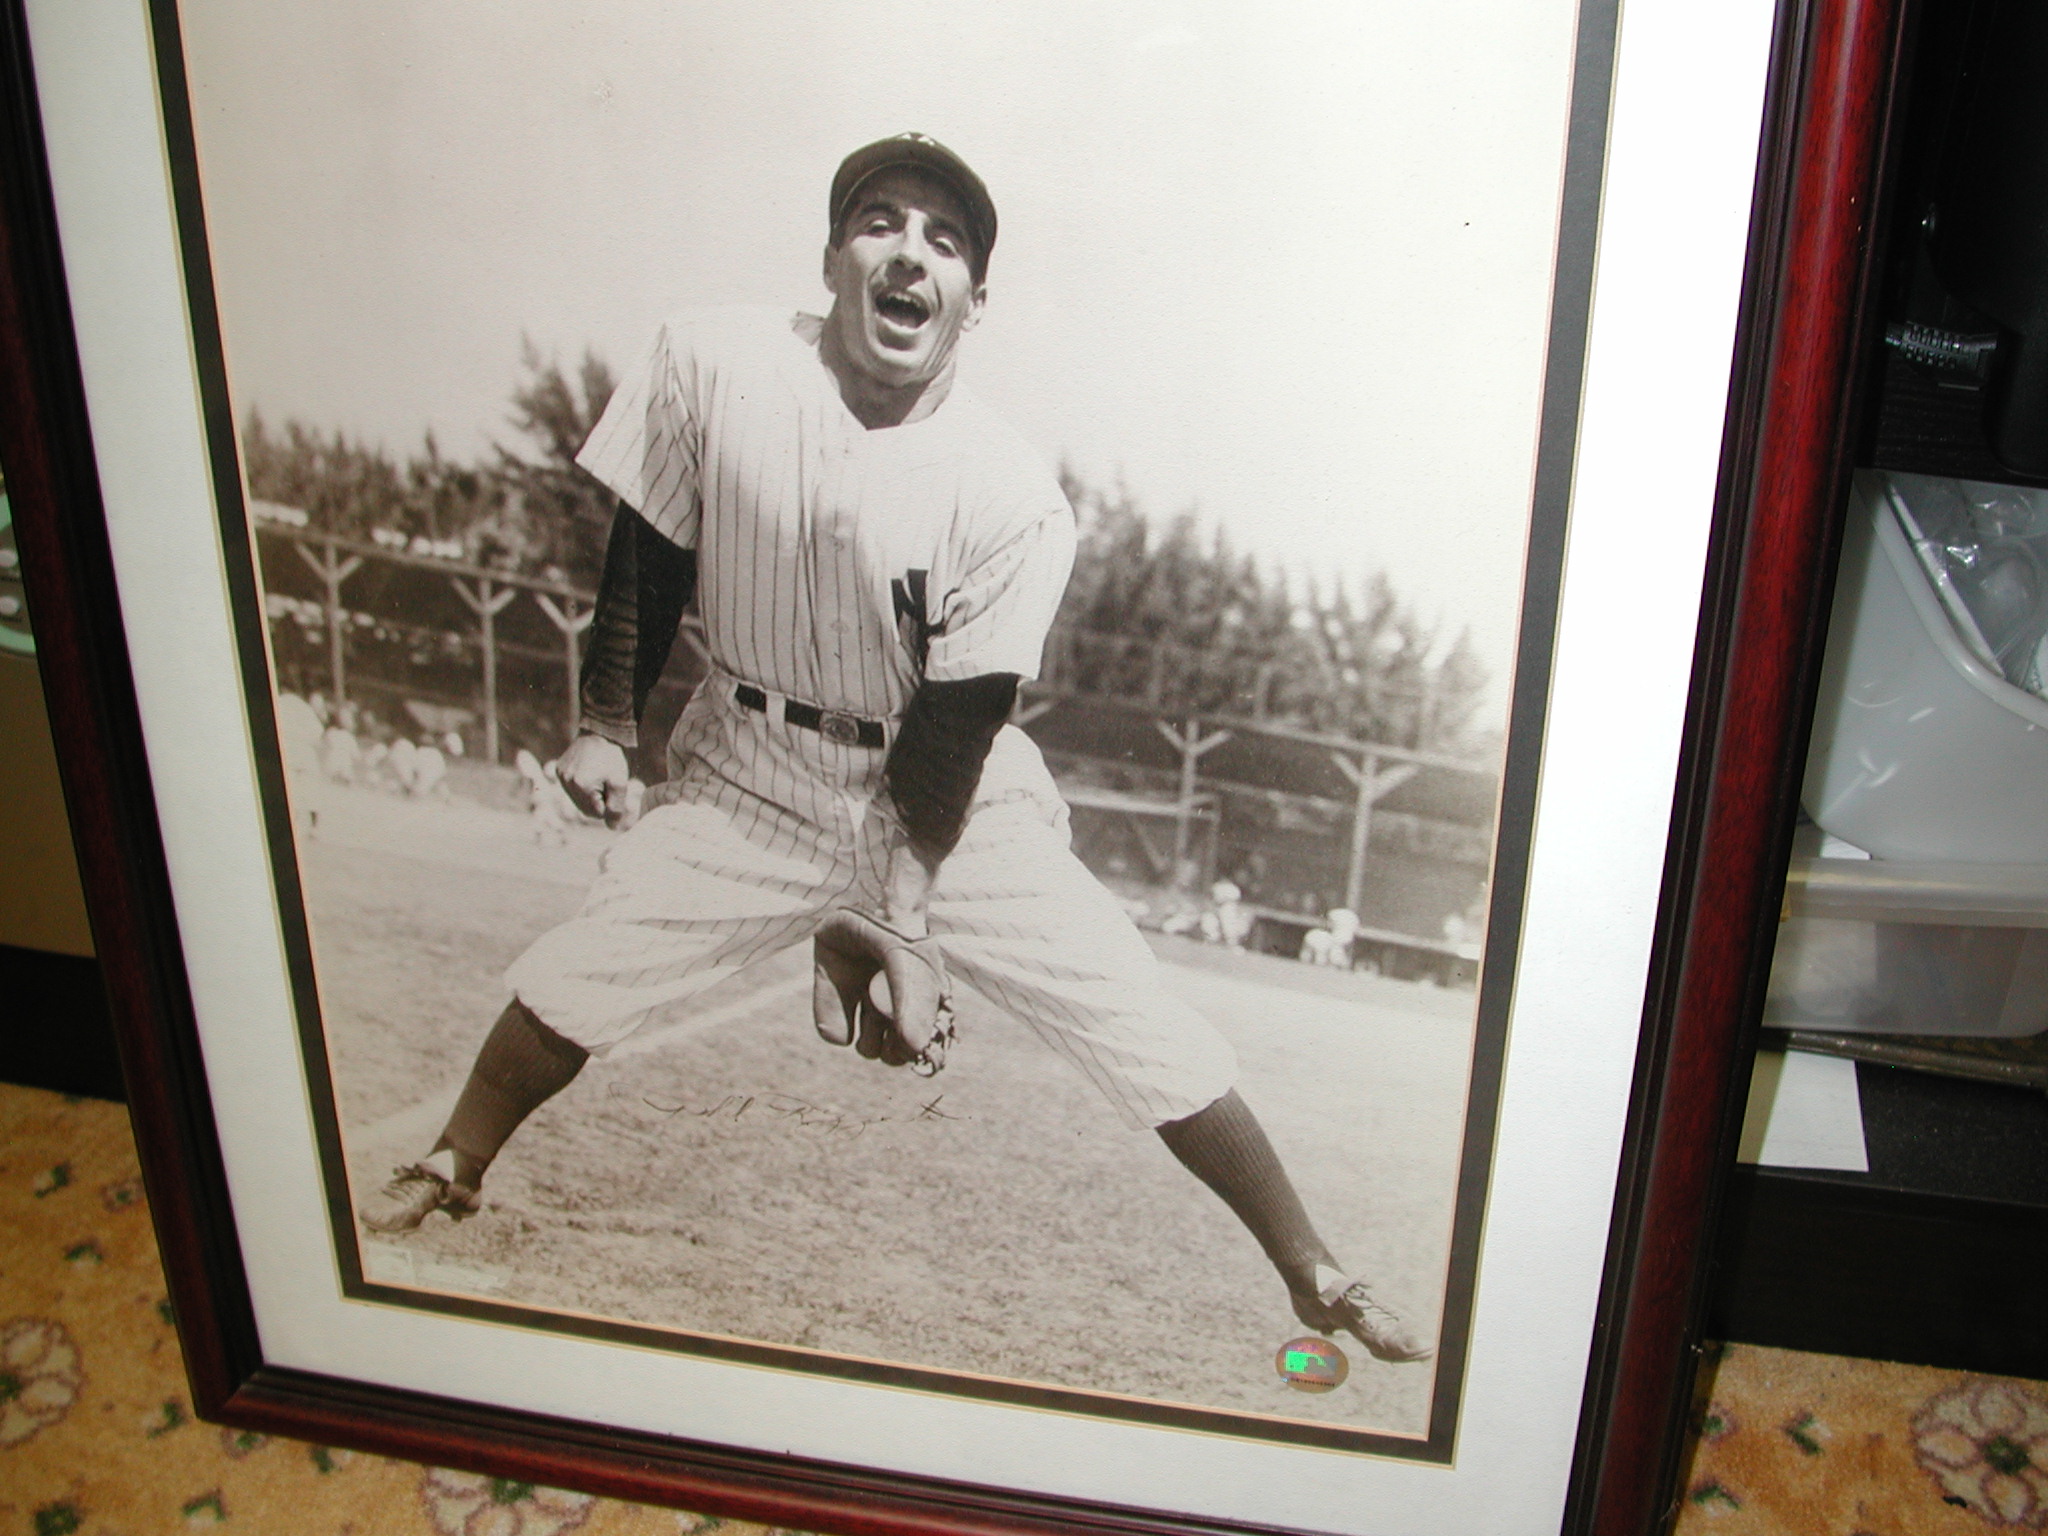 Artist Proof/NY Yankee player/broadcaster/Phil Rizzuto/The  Scooter/Signed/Numbered Copy/wall art decor